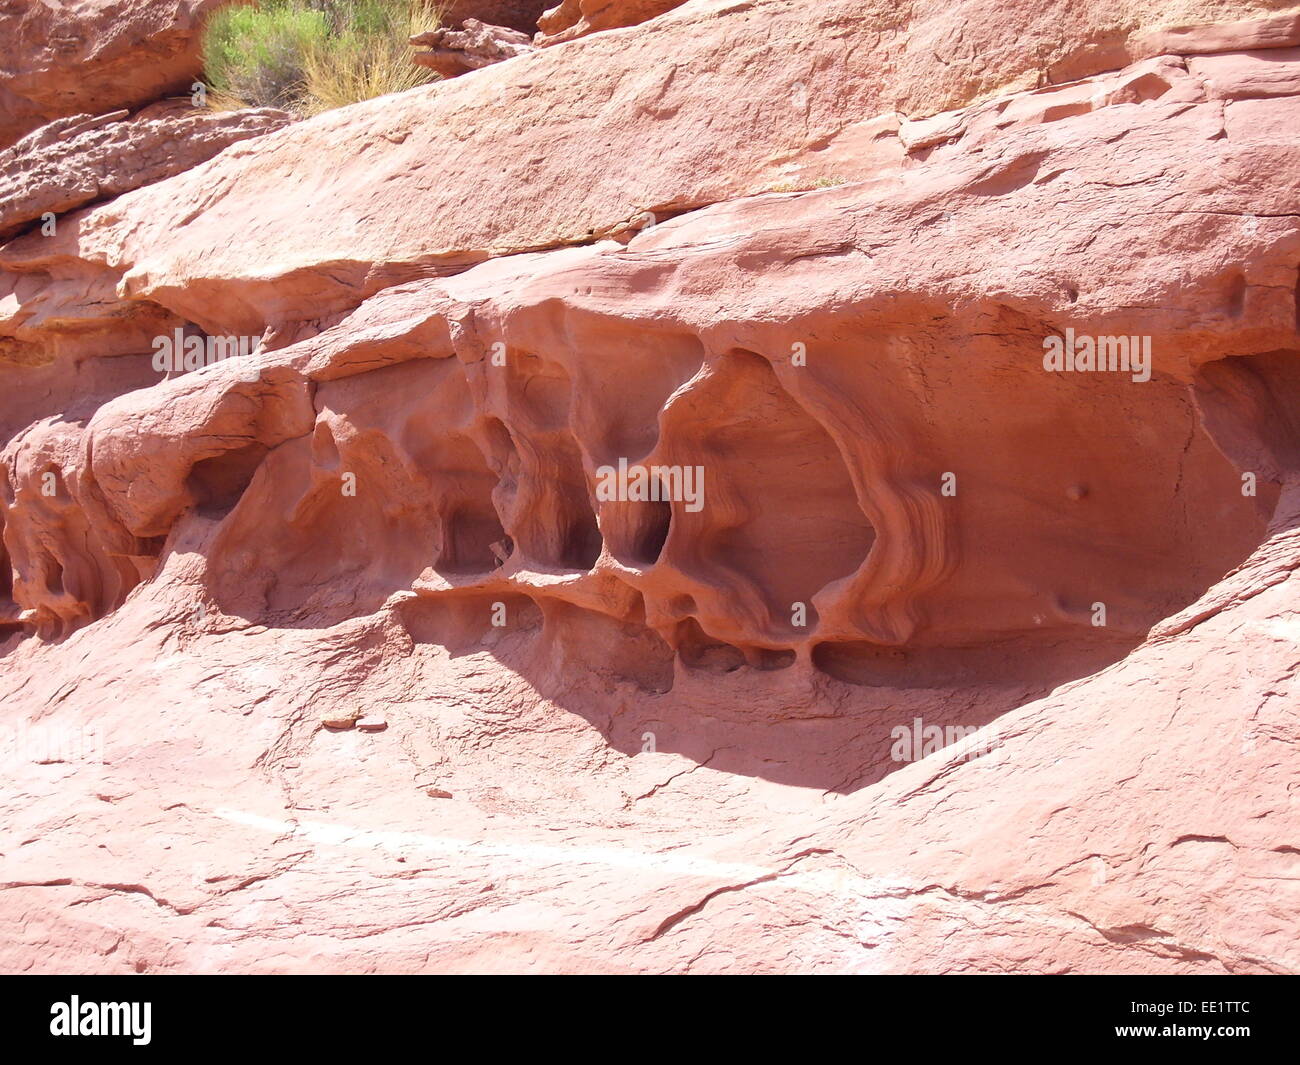 A sandstone formation in Canyonlands National Park. Utah, USA Stock Photo